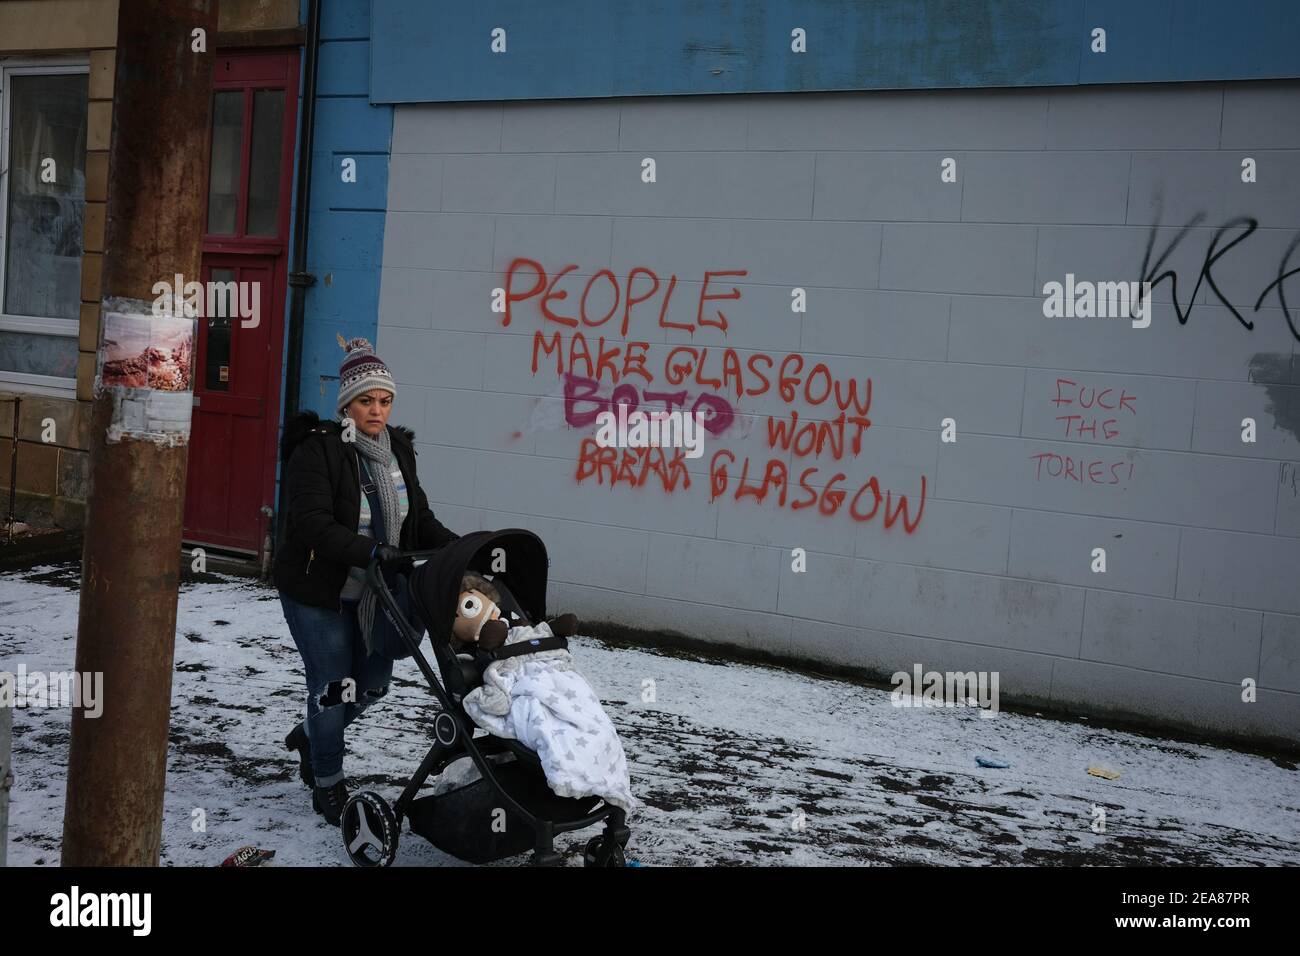 Glasgow, UK, on 8 February 2021. Political graffiti decrying British Prime Minister Boris Johnston on a wall in Govanhill district of the city. The wall is regularly daubed with political slogans and statements, and this same statement previously read '(Nicola) Sturgeon won't break Glasgow' as opposed to the current 'BO(ris) JO(hnson) won't break Glasgow'. Photo credit: Jeremy Sutton-Hibbert/Alamy Live News Stock Photo